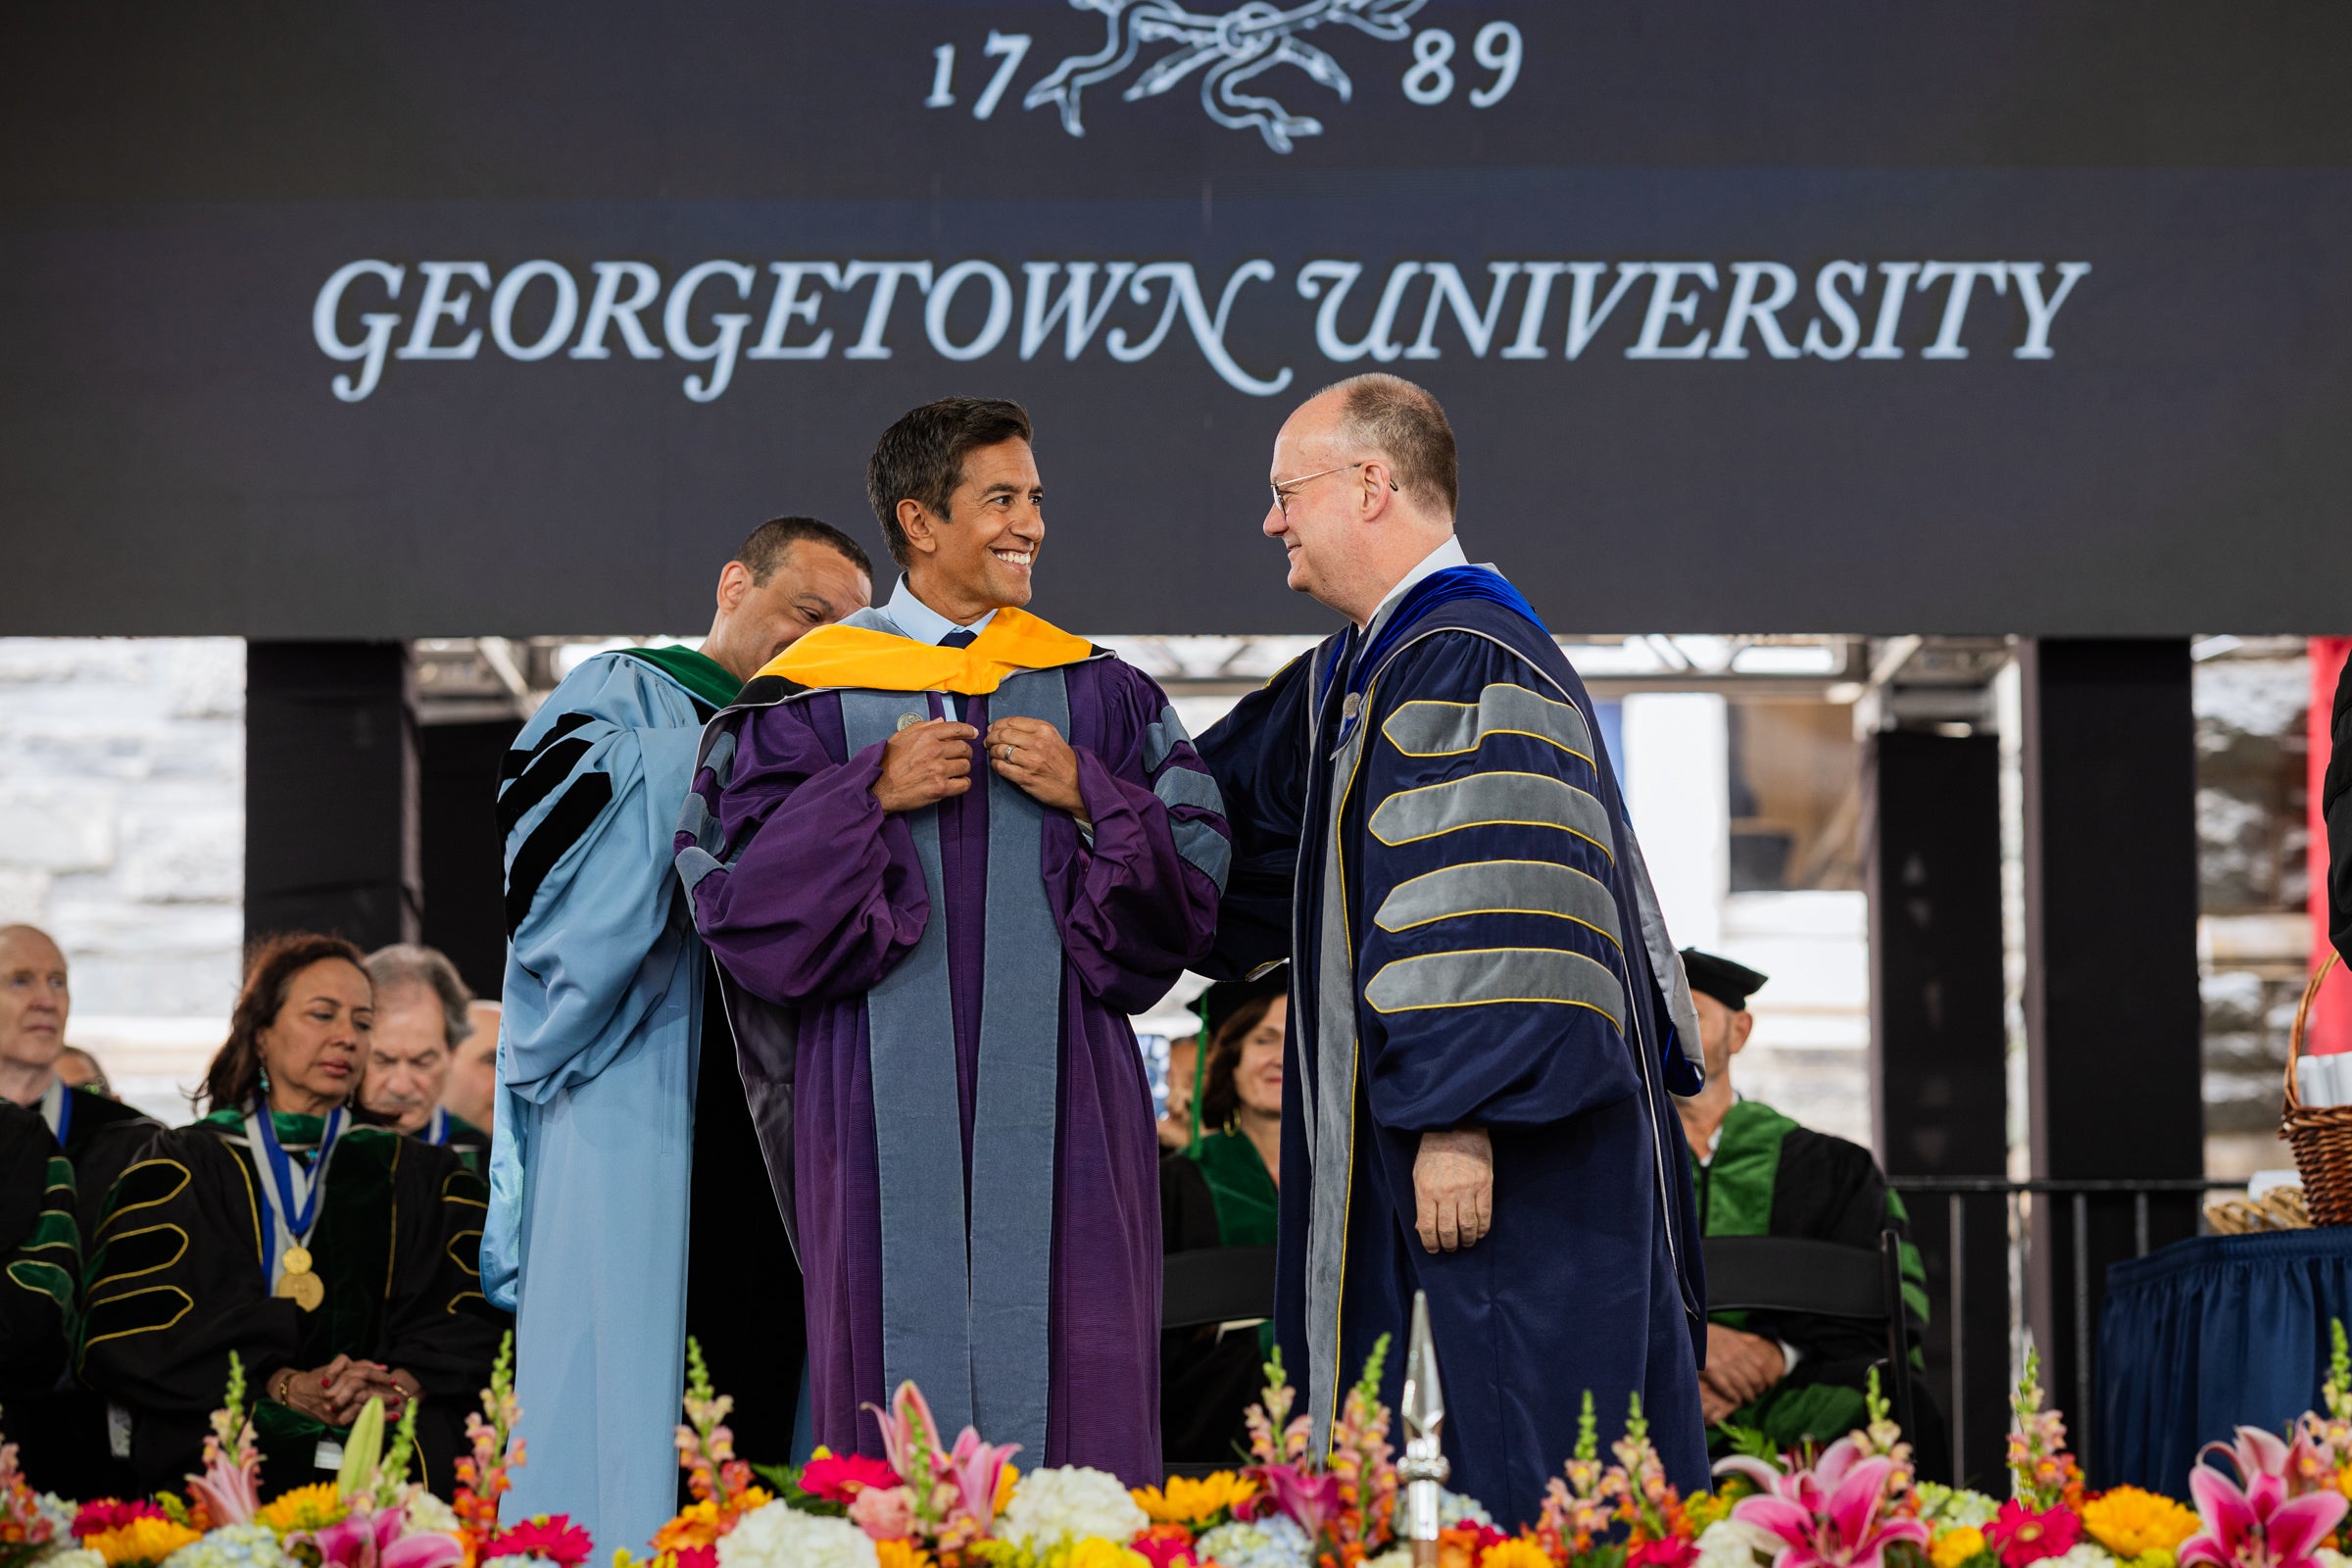 Sanjay Gupta getting his honoroary degree from PResident DiGioia and the dean.